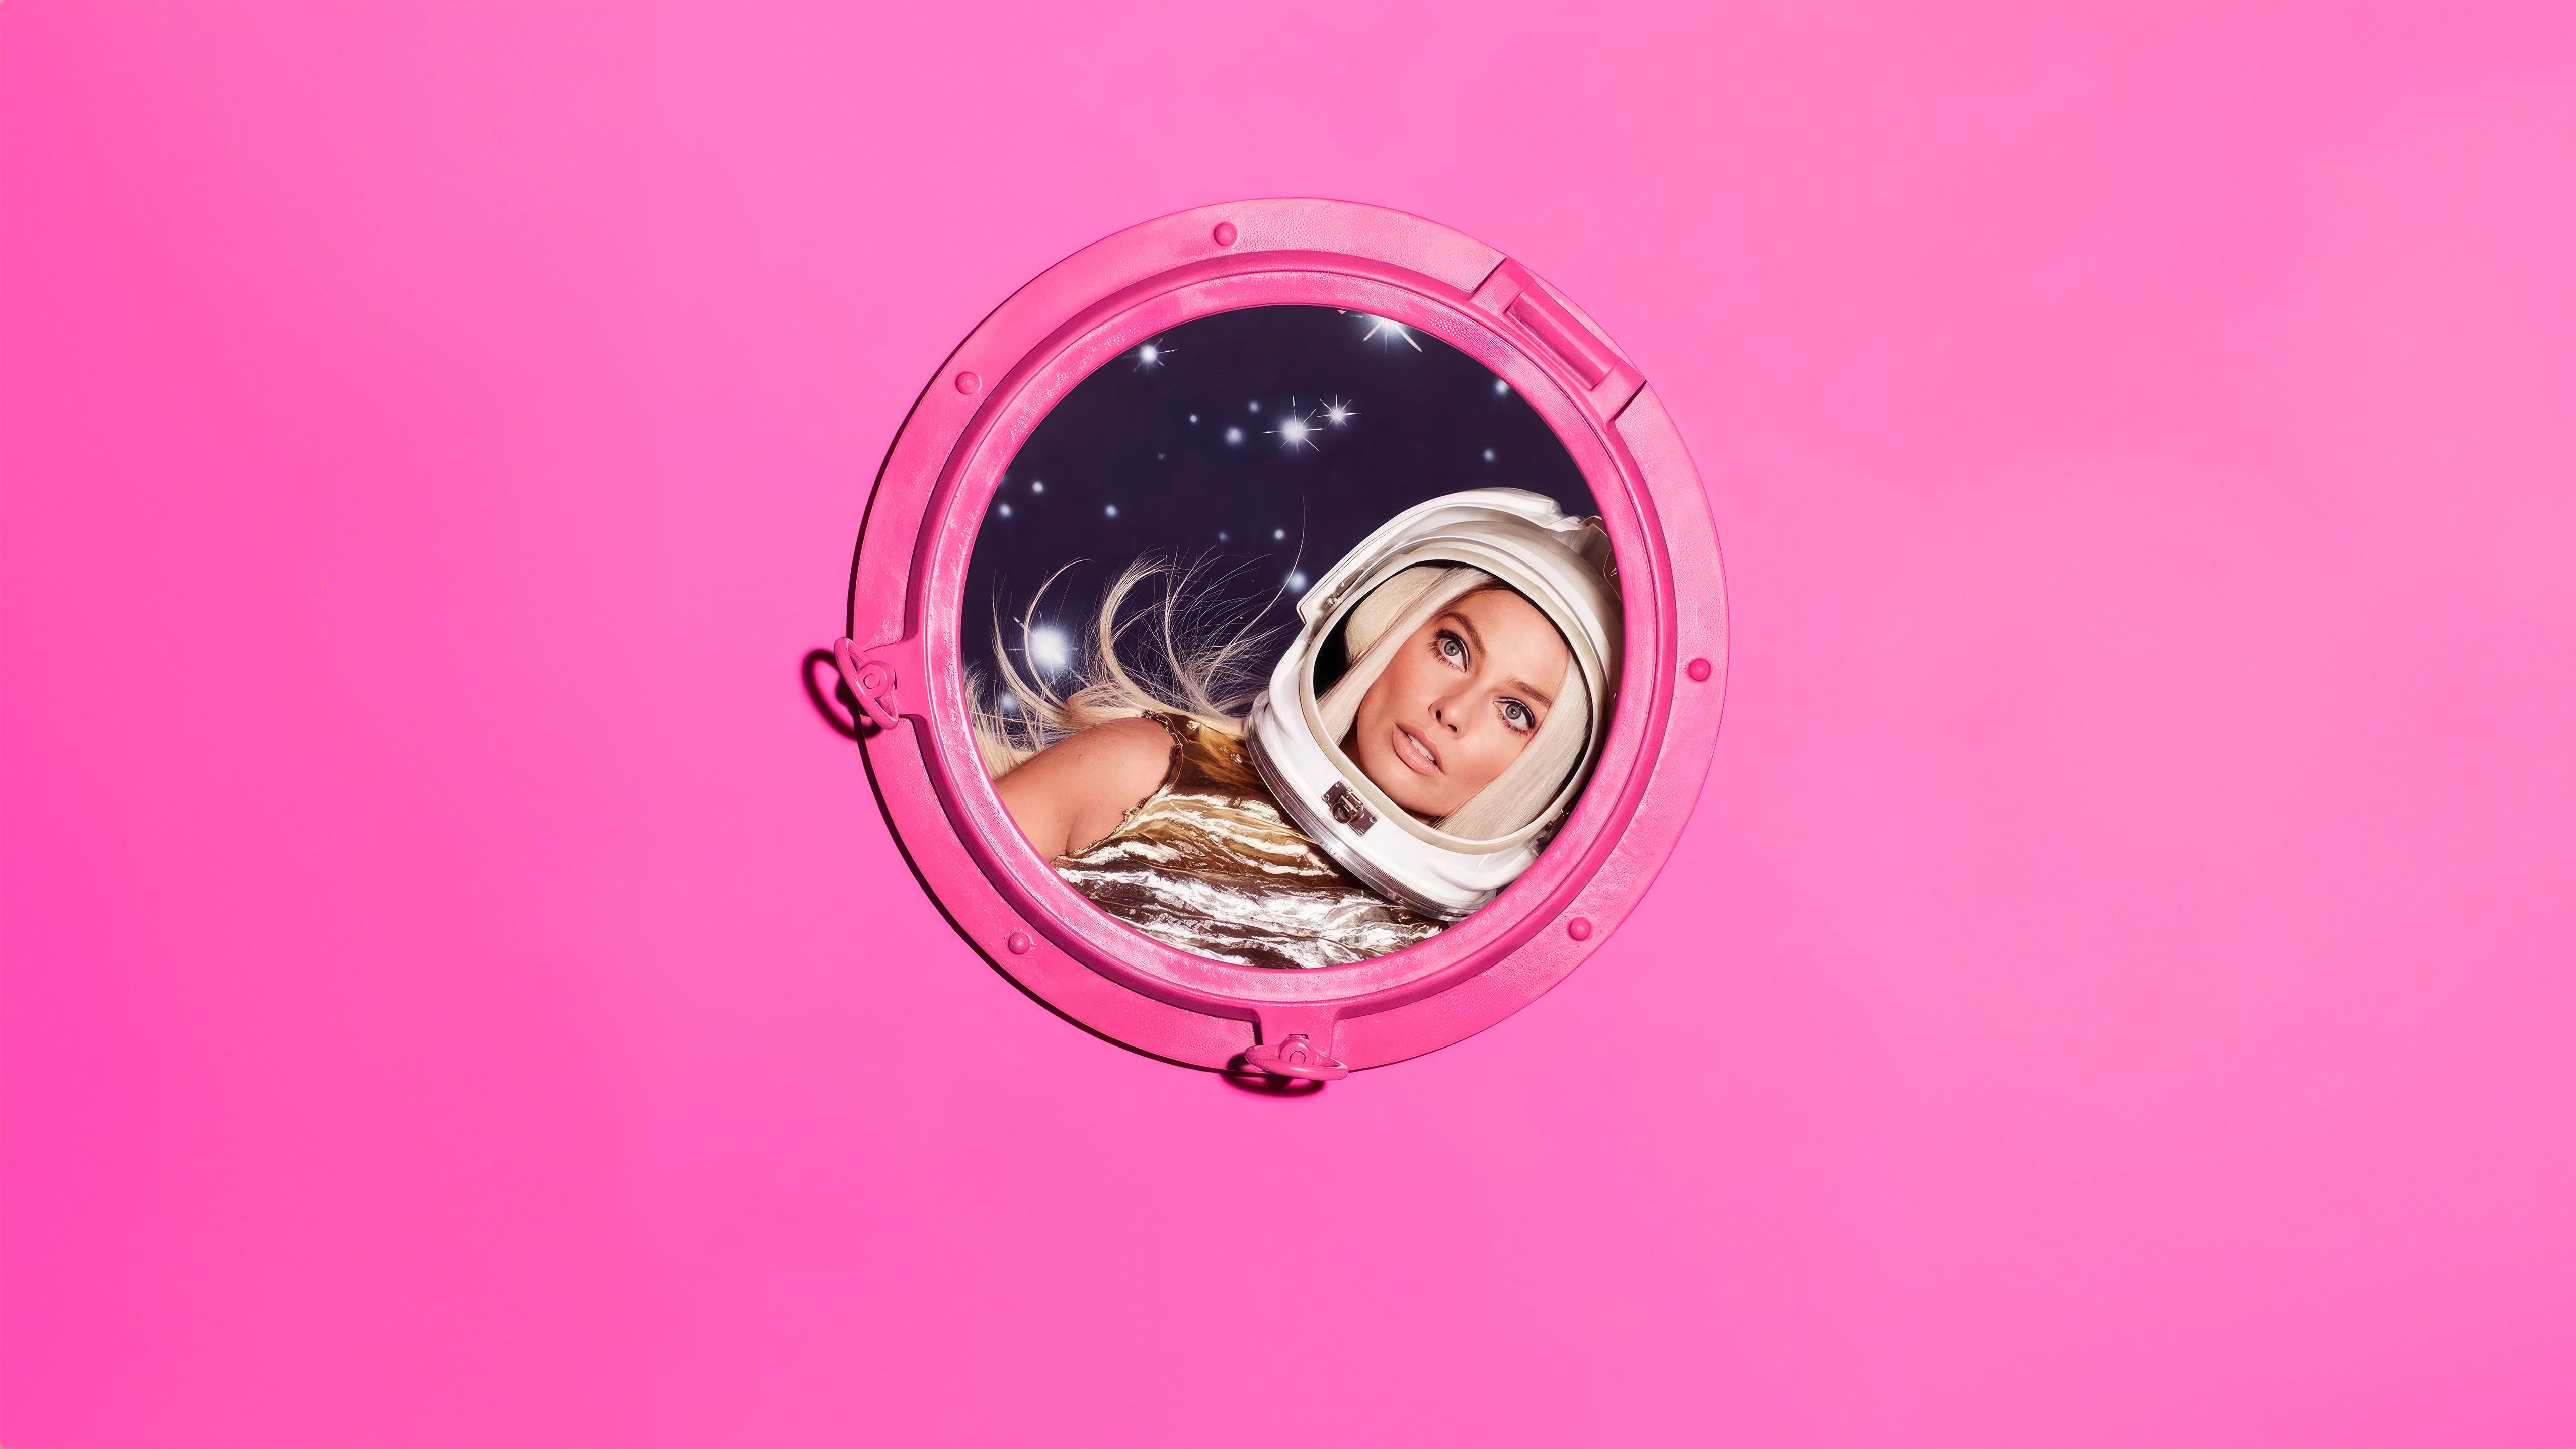 A woman in a spacesuit looking out of a window in space - Barbie